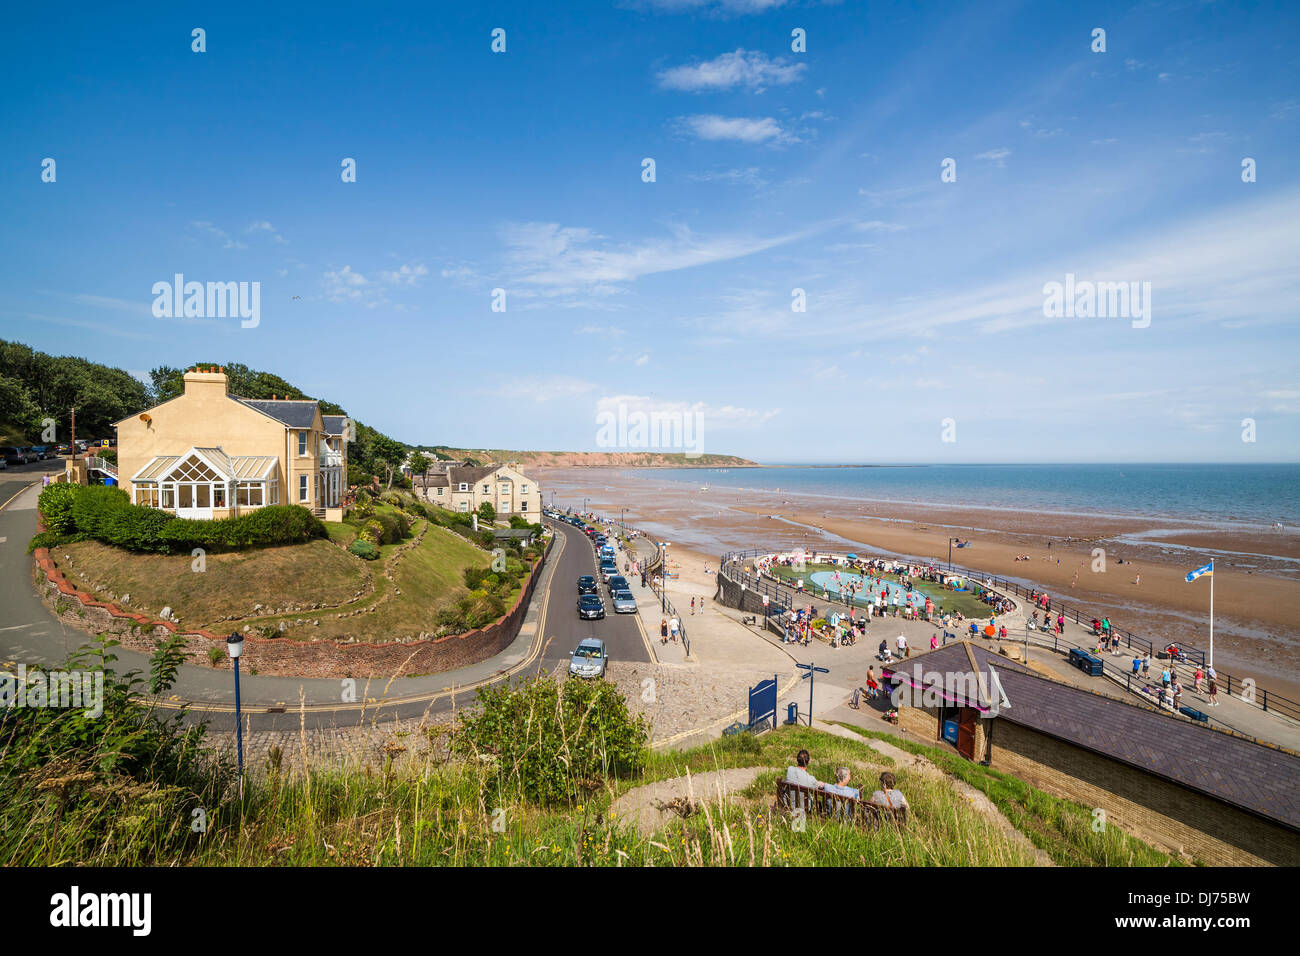 Filey, North Yorkshire. Stock Photo